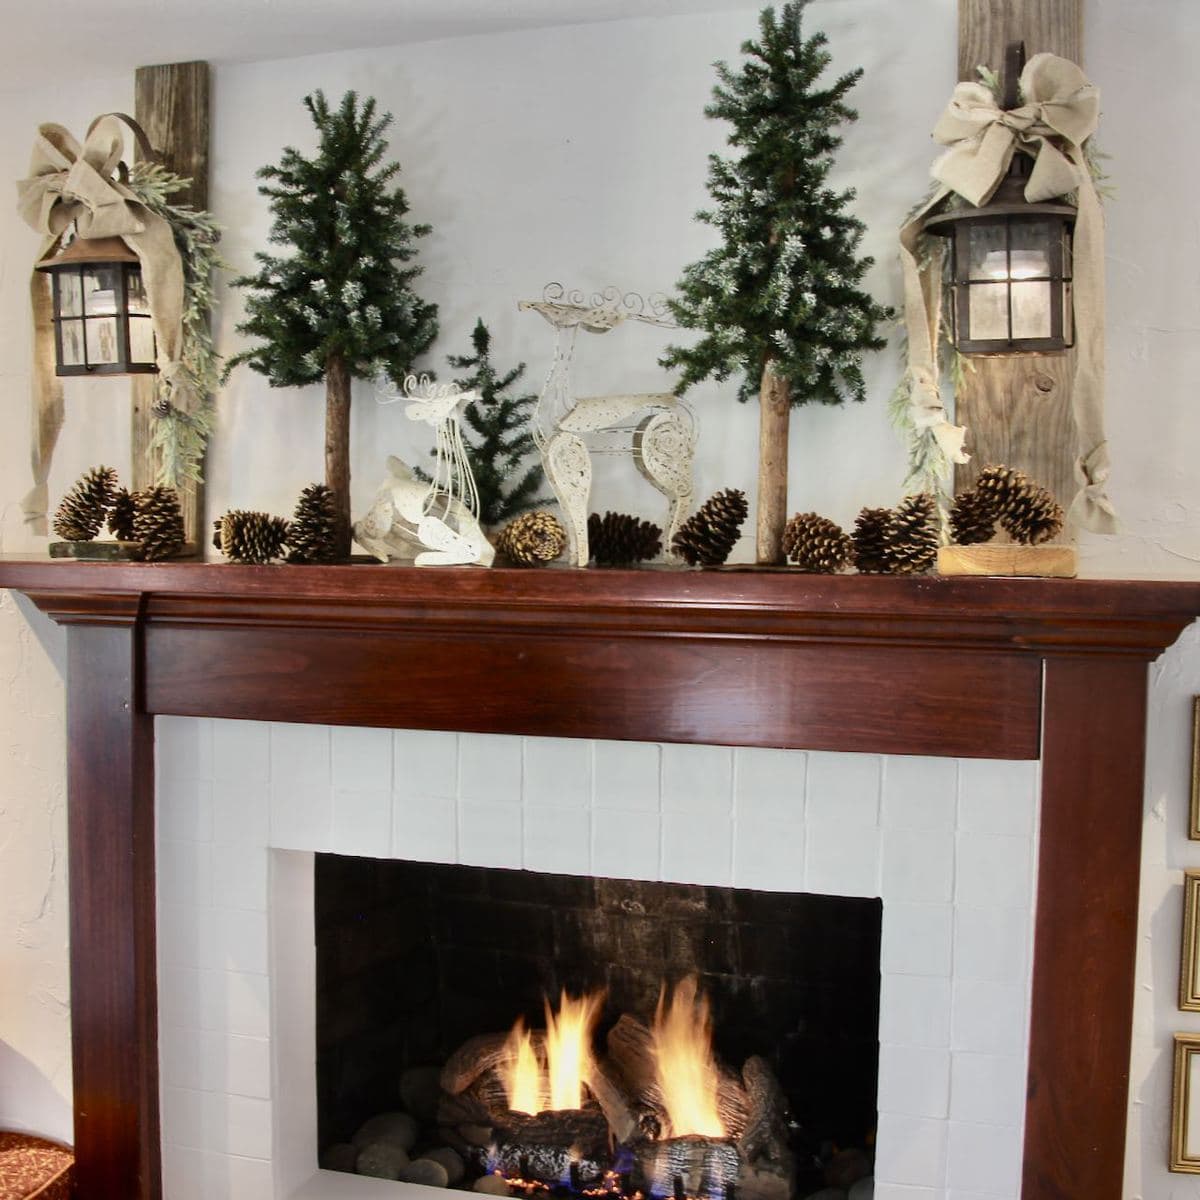 Long view of a fire in the fireplace with a wood surround and mantel with two distressed wood posts and vintage lanterns adorned with linen bows and greenery, with trees and oinecones filling the mantel between the lights